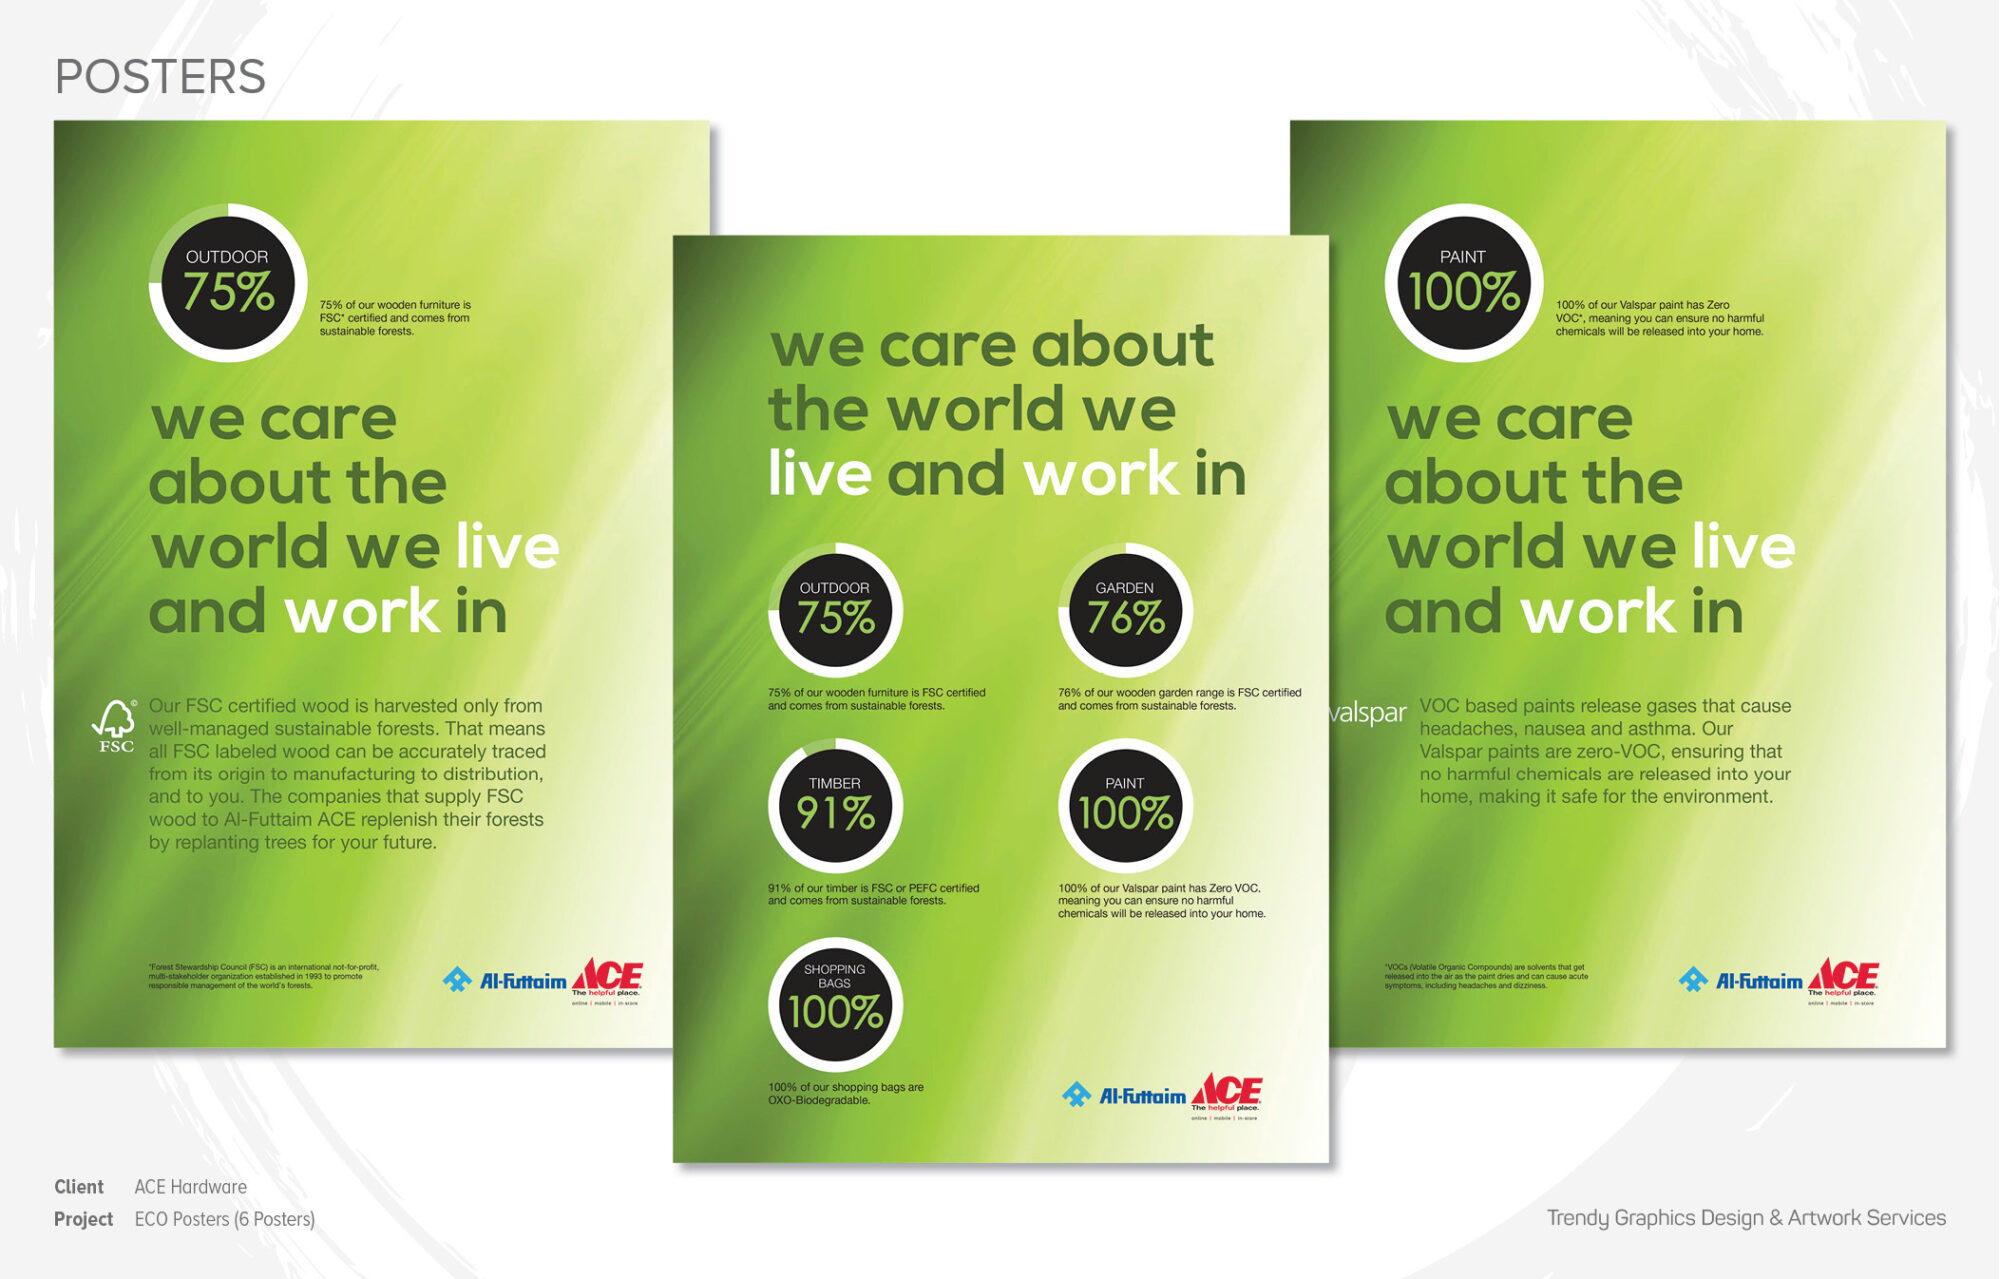 ACE Hardware – ECO Posters (6 Posters)